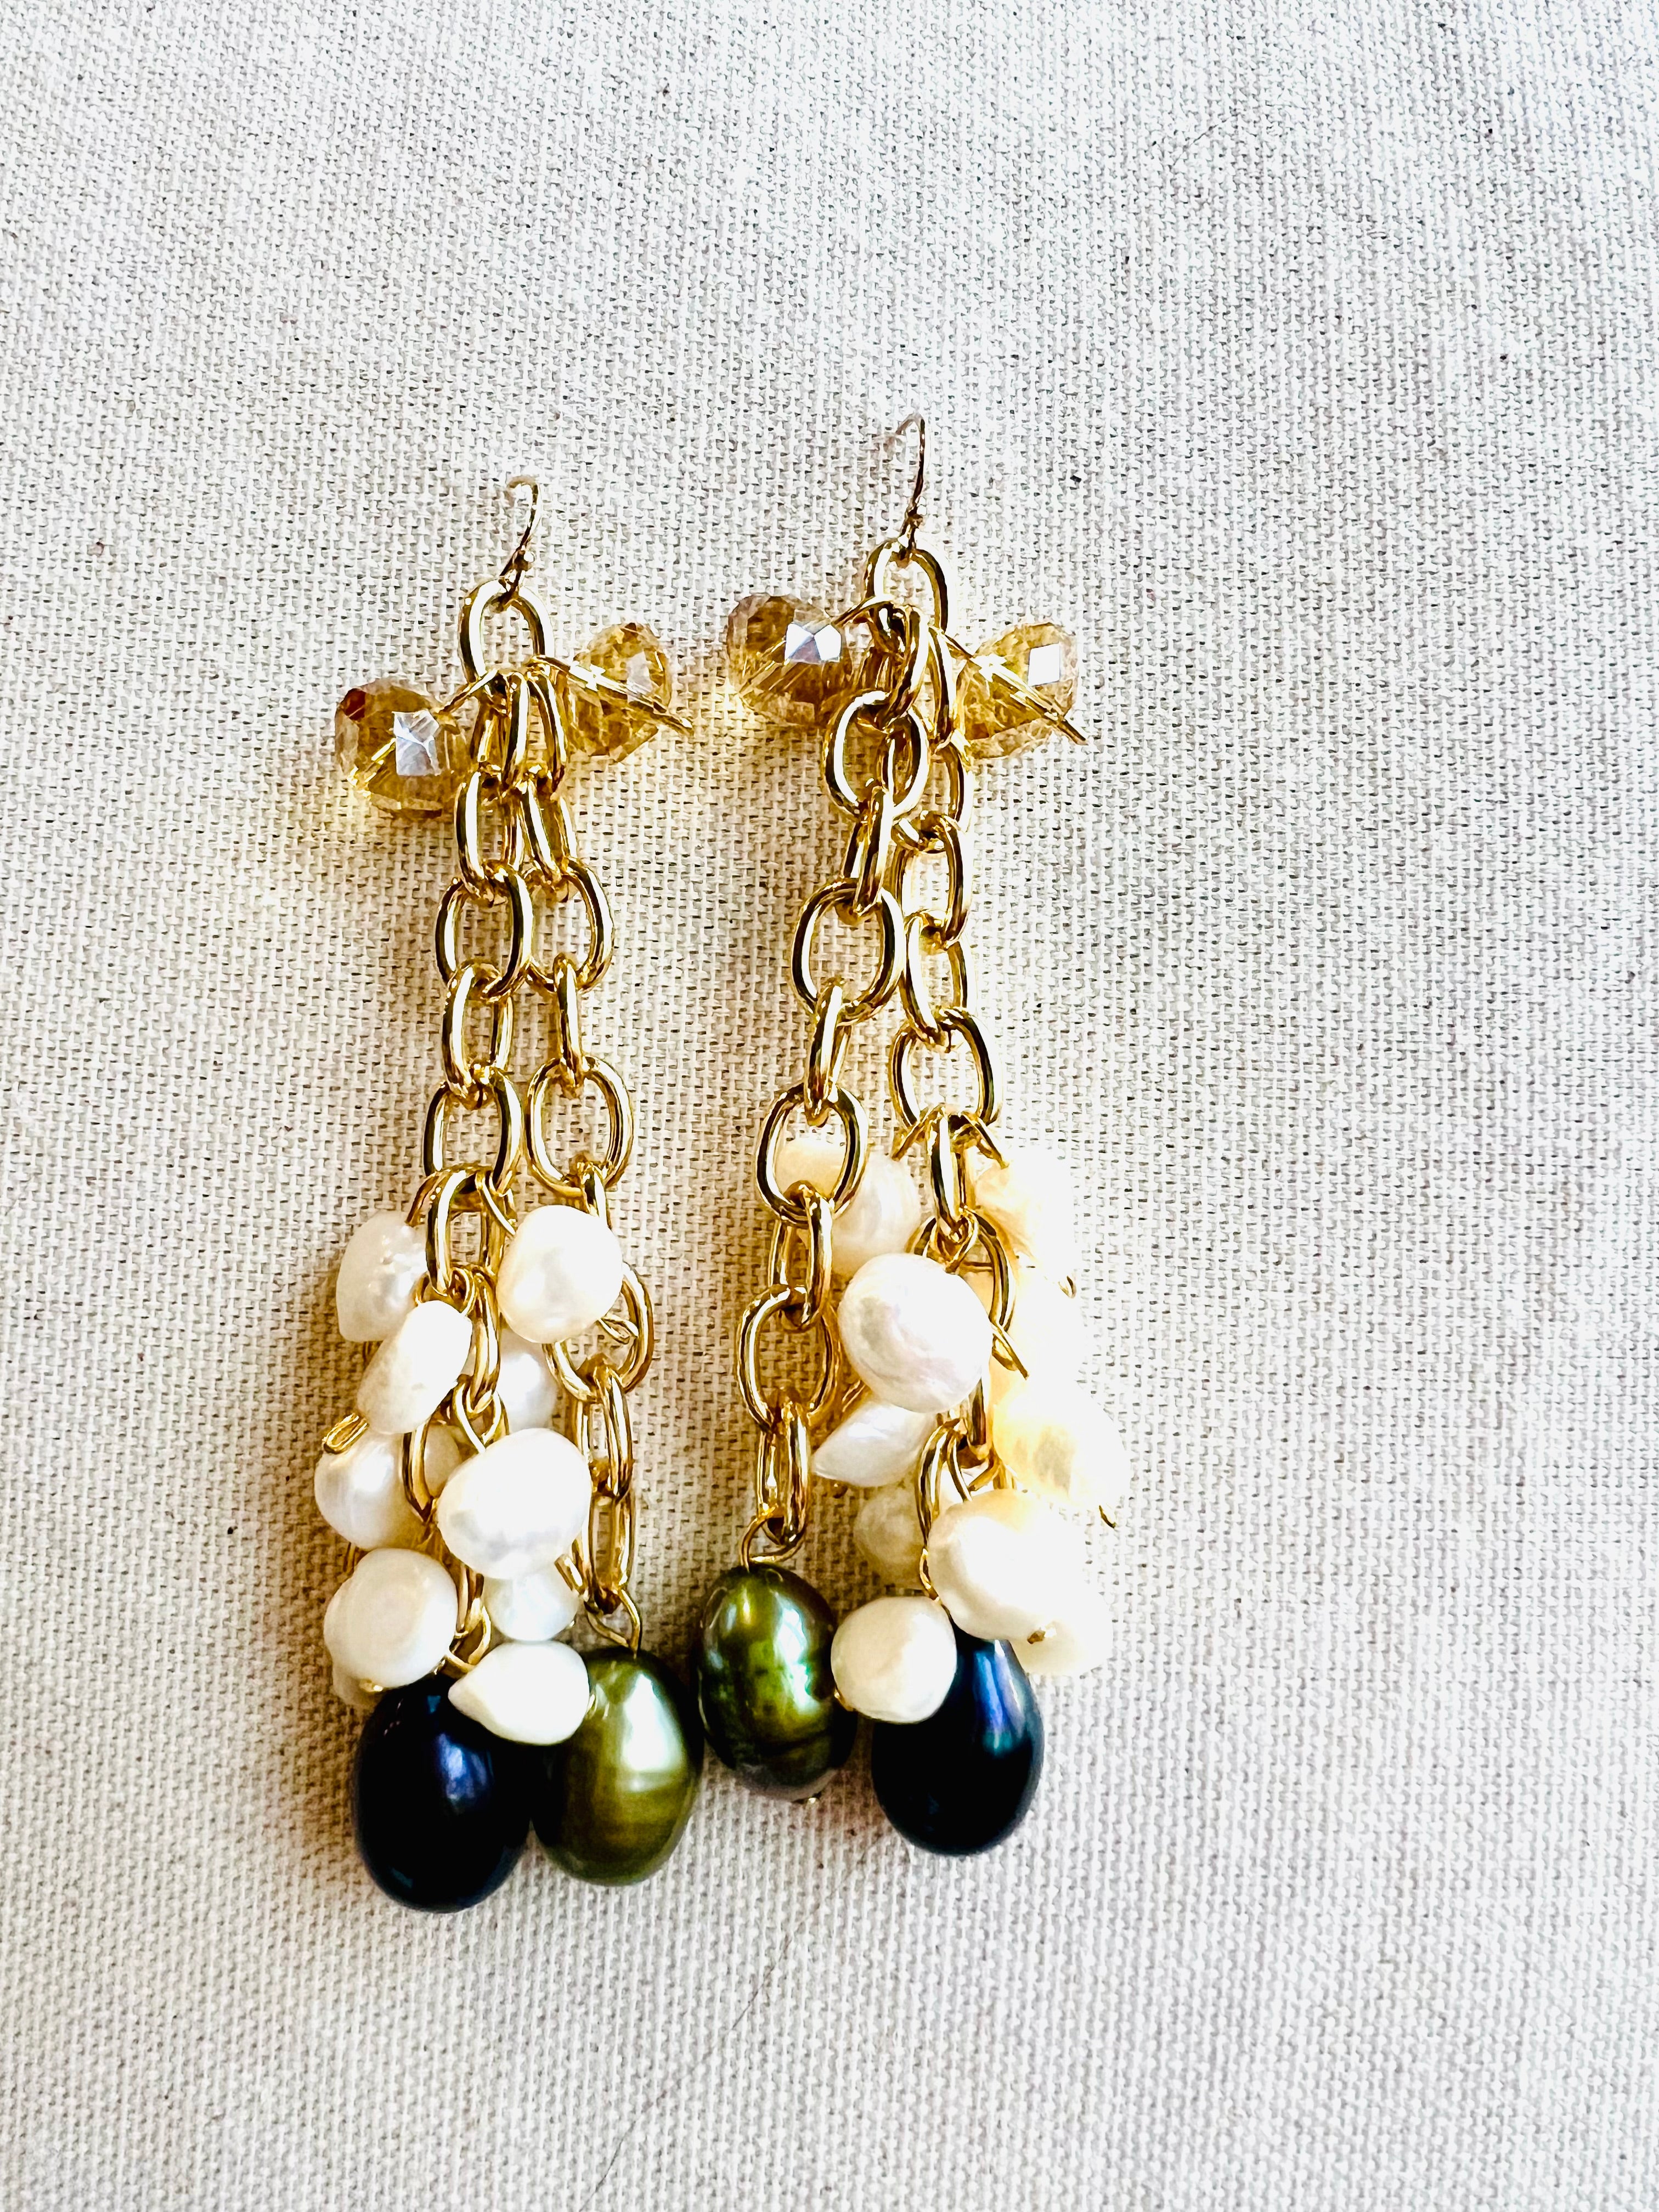 Women’s Gold Chain, Freshwater Pearl,Crystals and Olive Green and Royal Blue Pearl Earrings